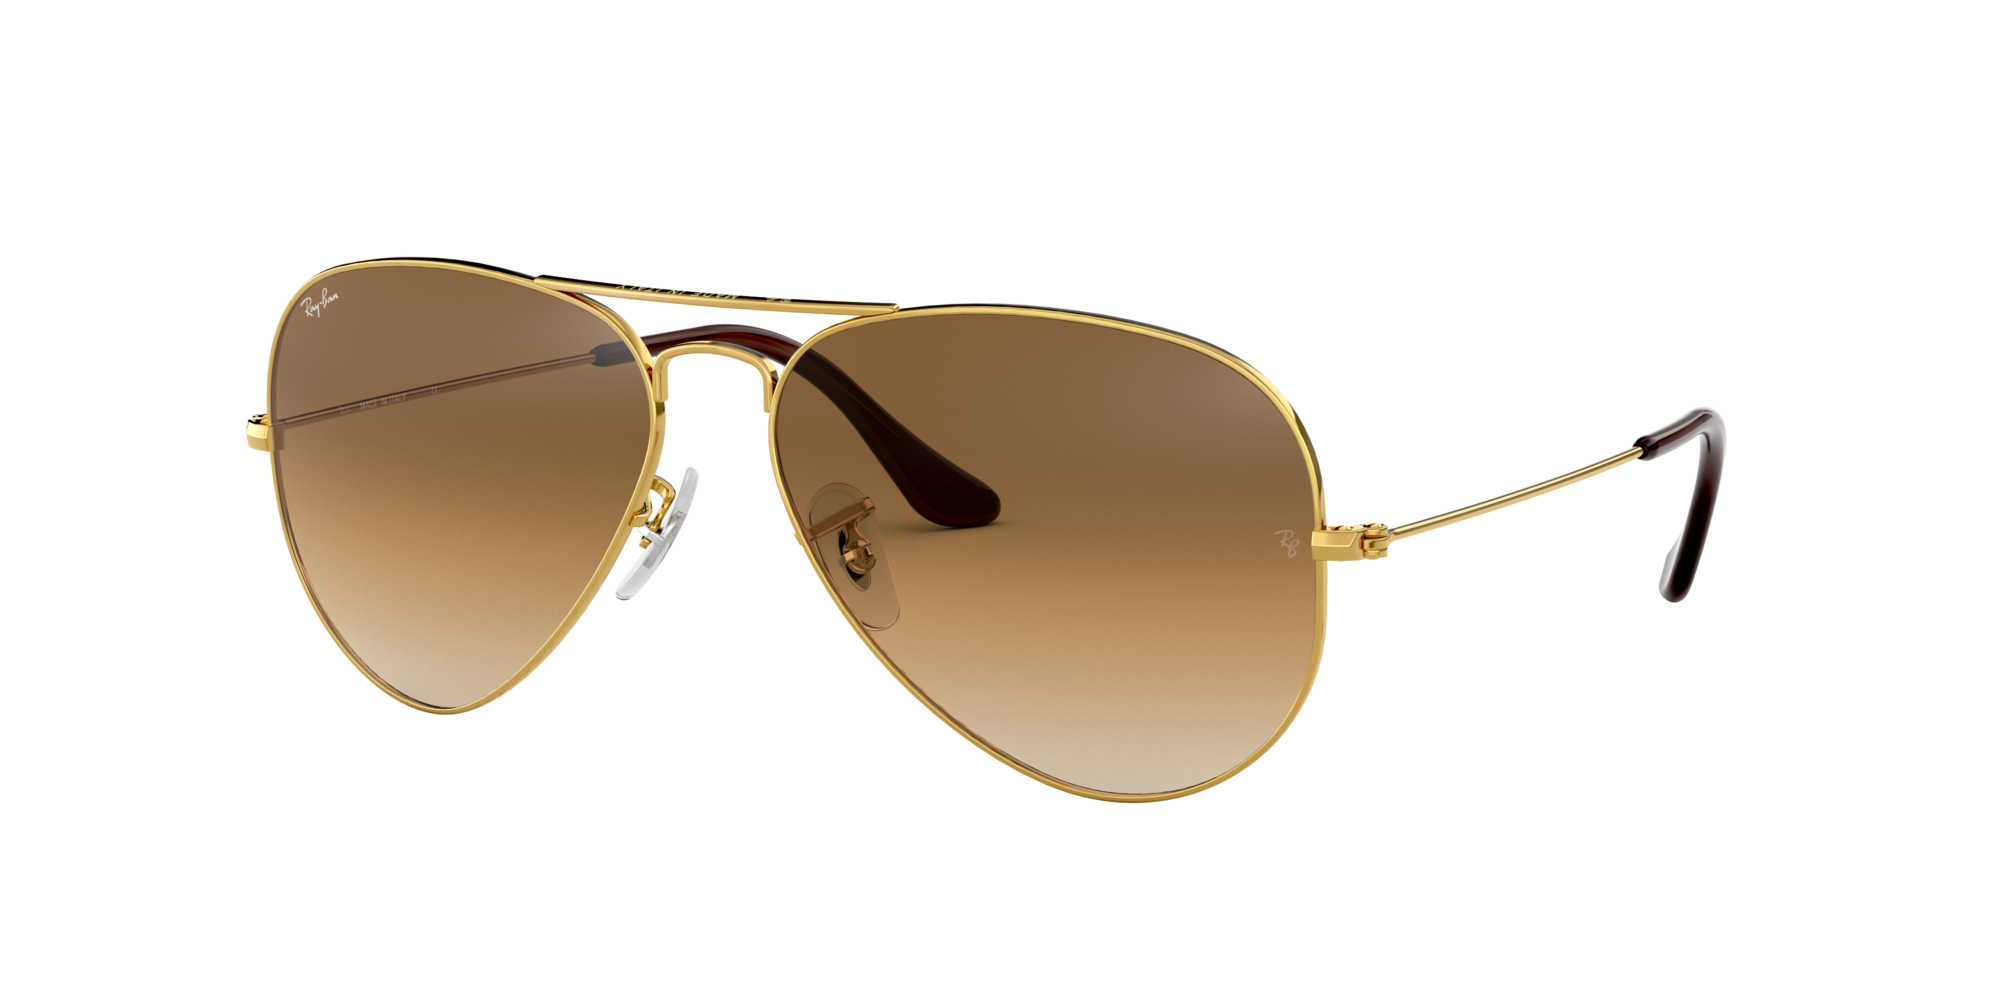 Ray-Ban 0RB3025 in Gold Sunglasses | OPSM